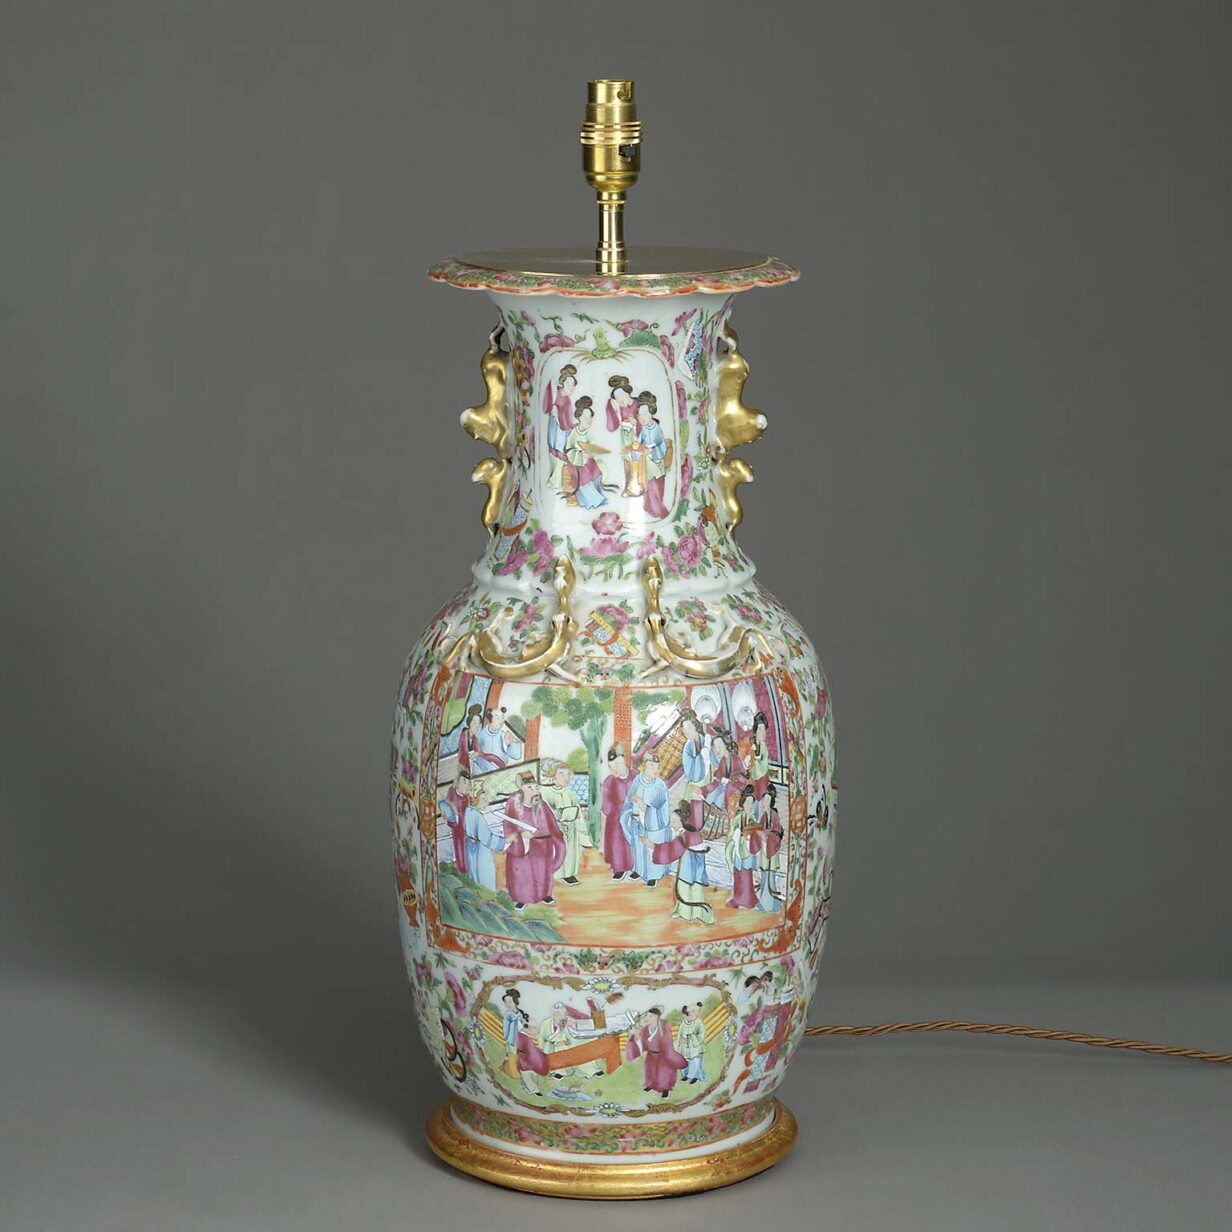 Matched pair of 19th century canton porcelain vases as lamps